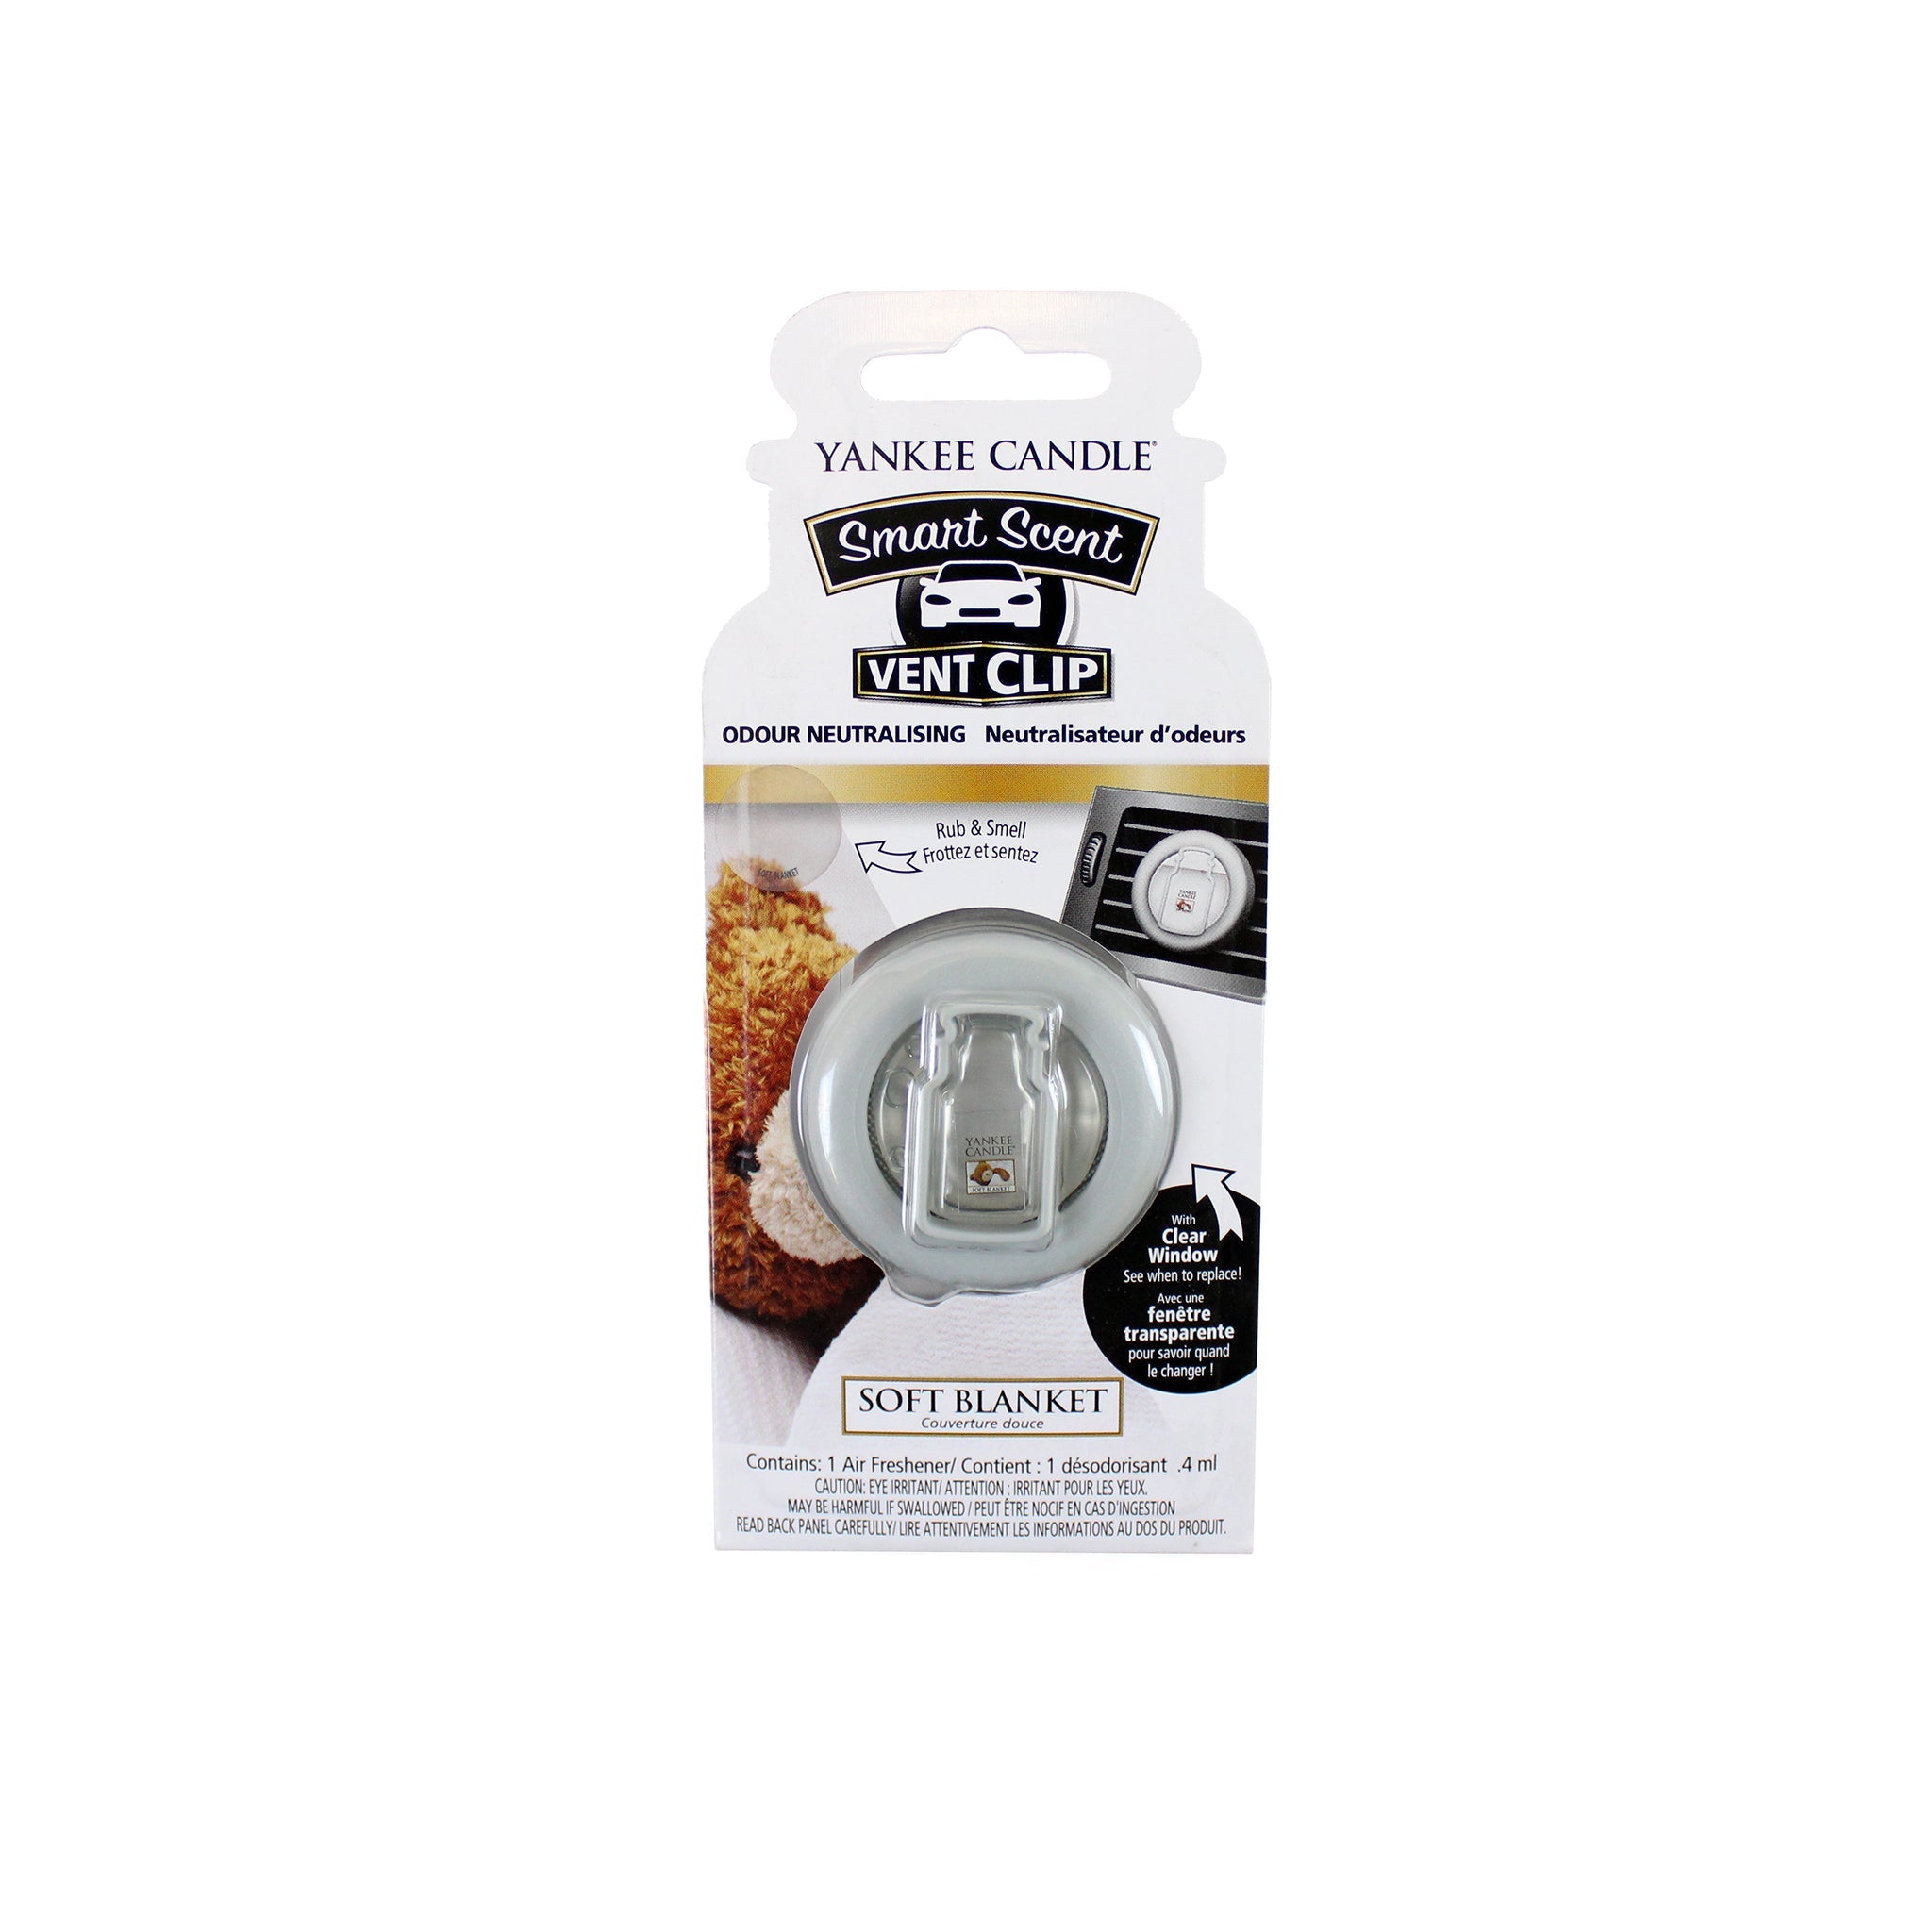 Yankee Candle Soft Blanket Smart Scent Vent Clip Air Freshener